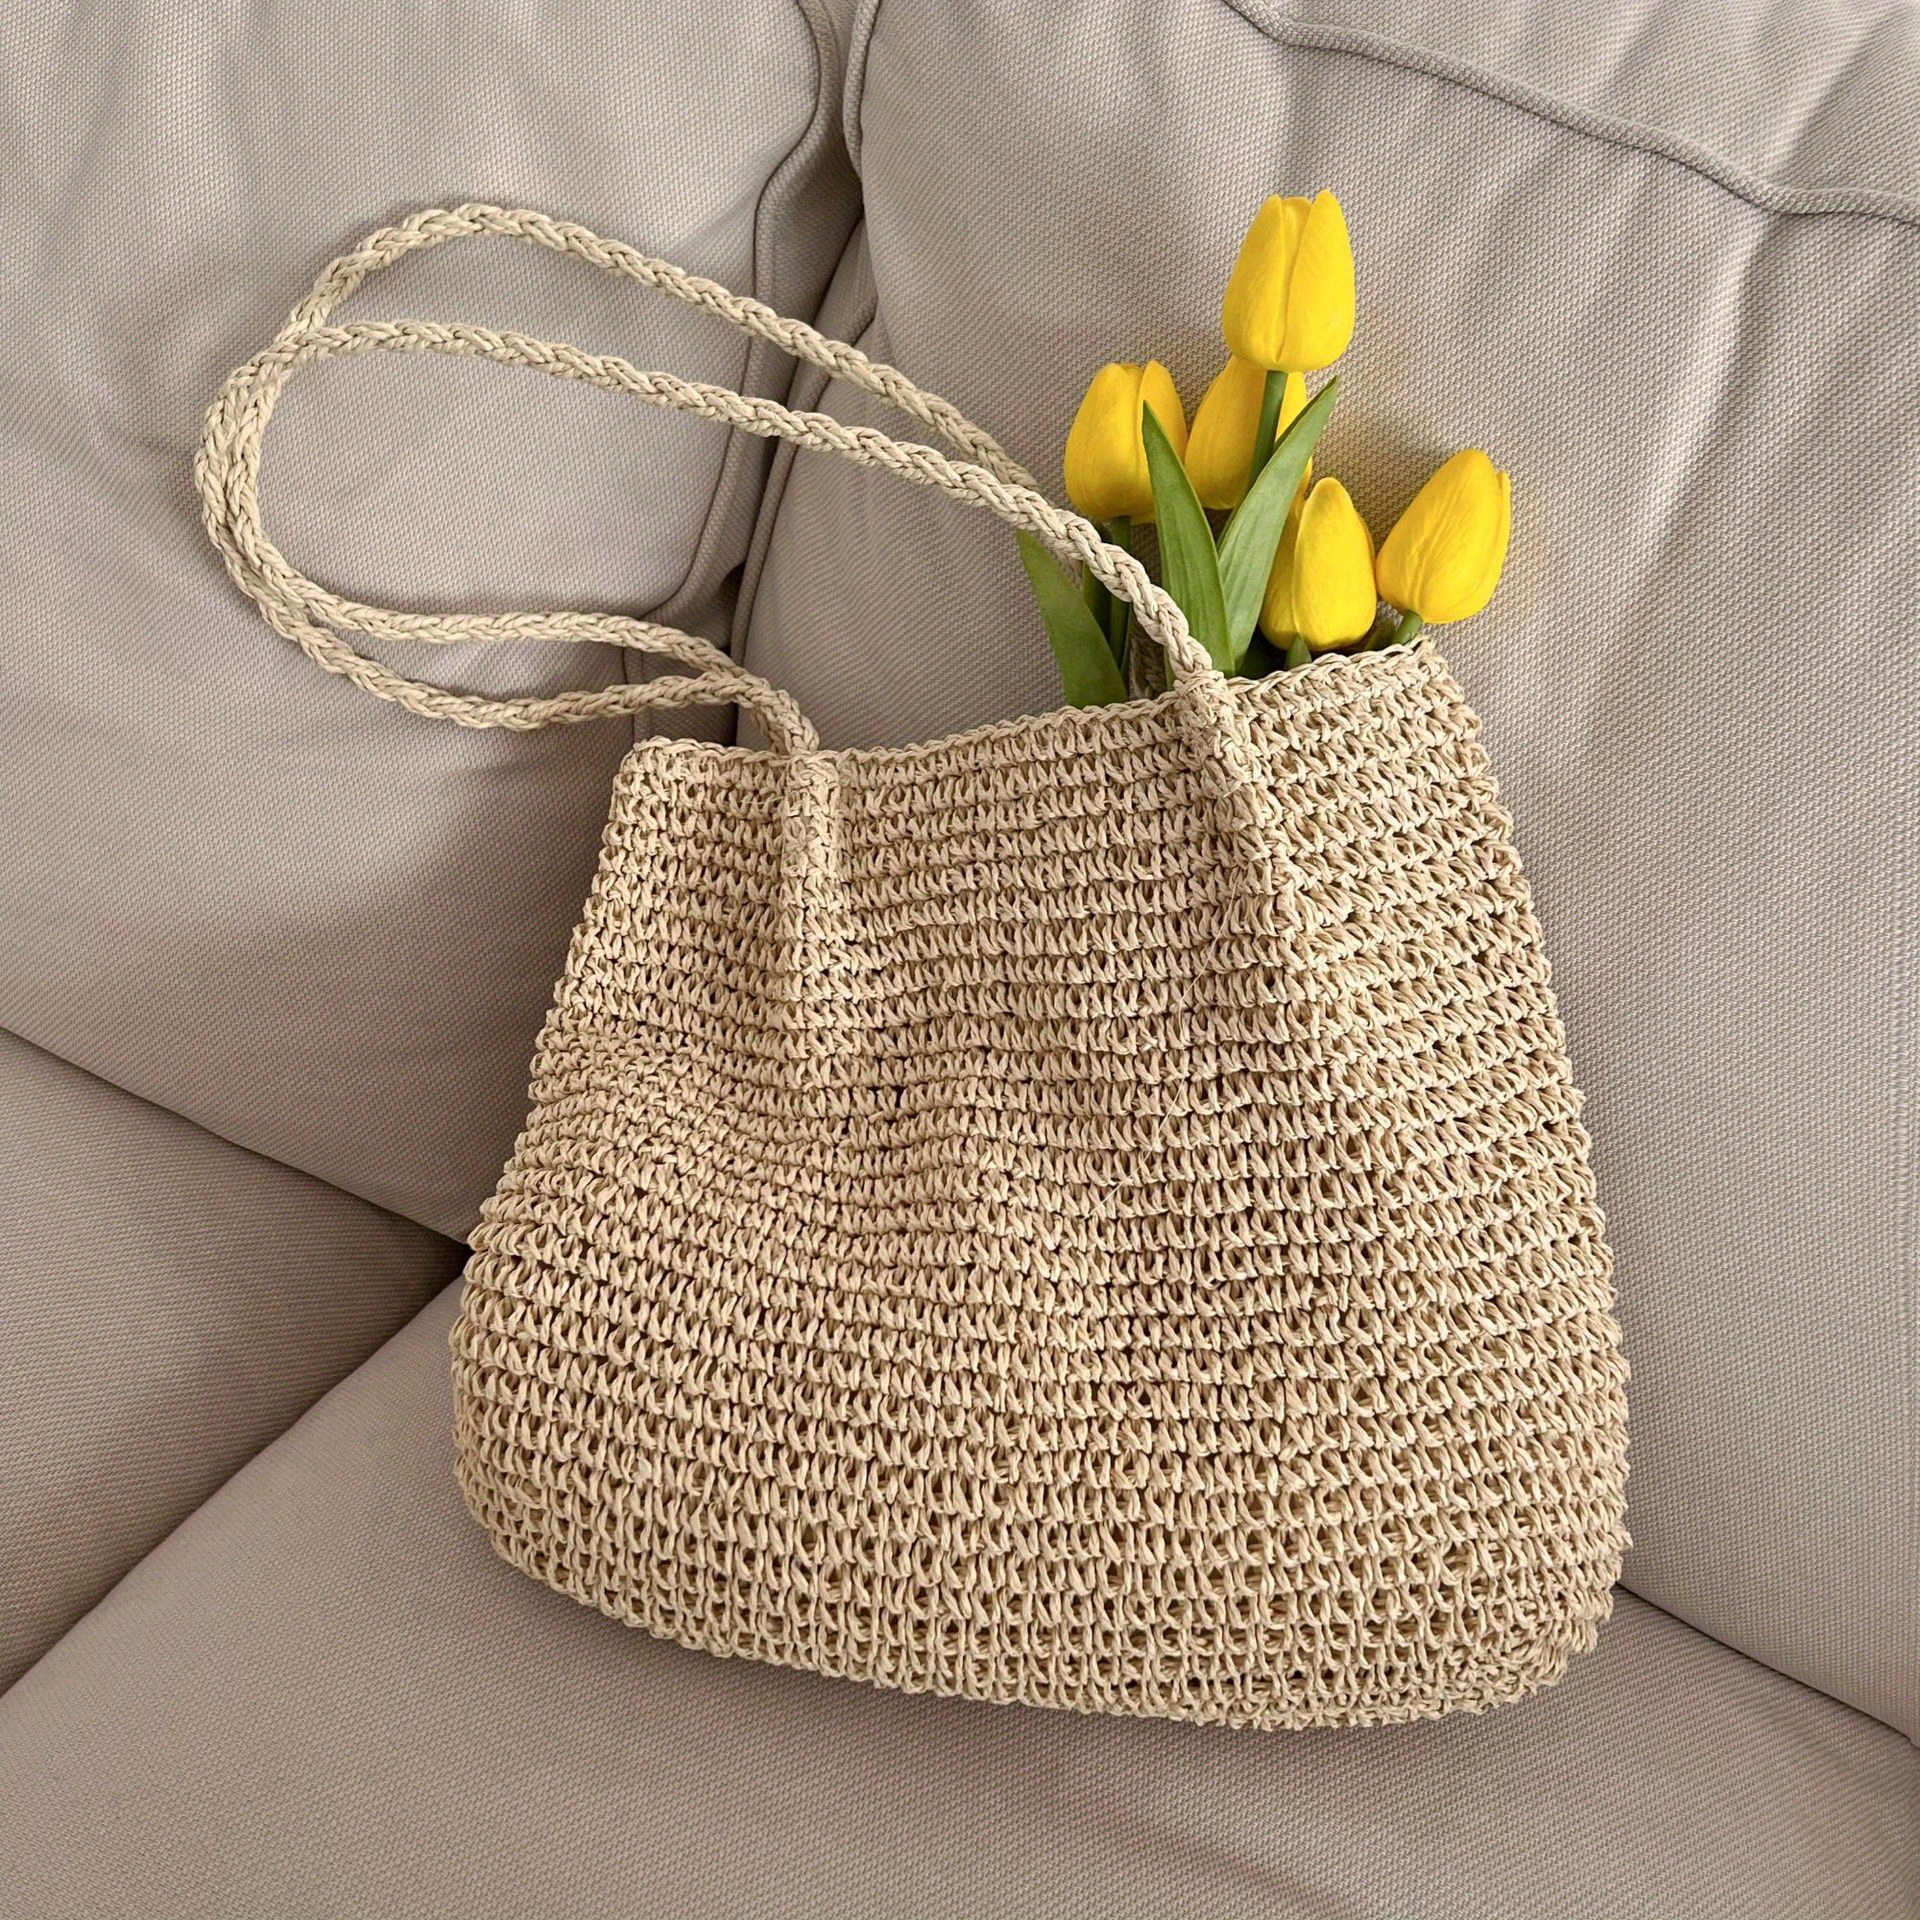 Casual Large Woven Straw Beach Bag in Beige for Women